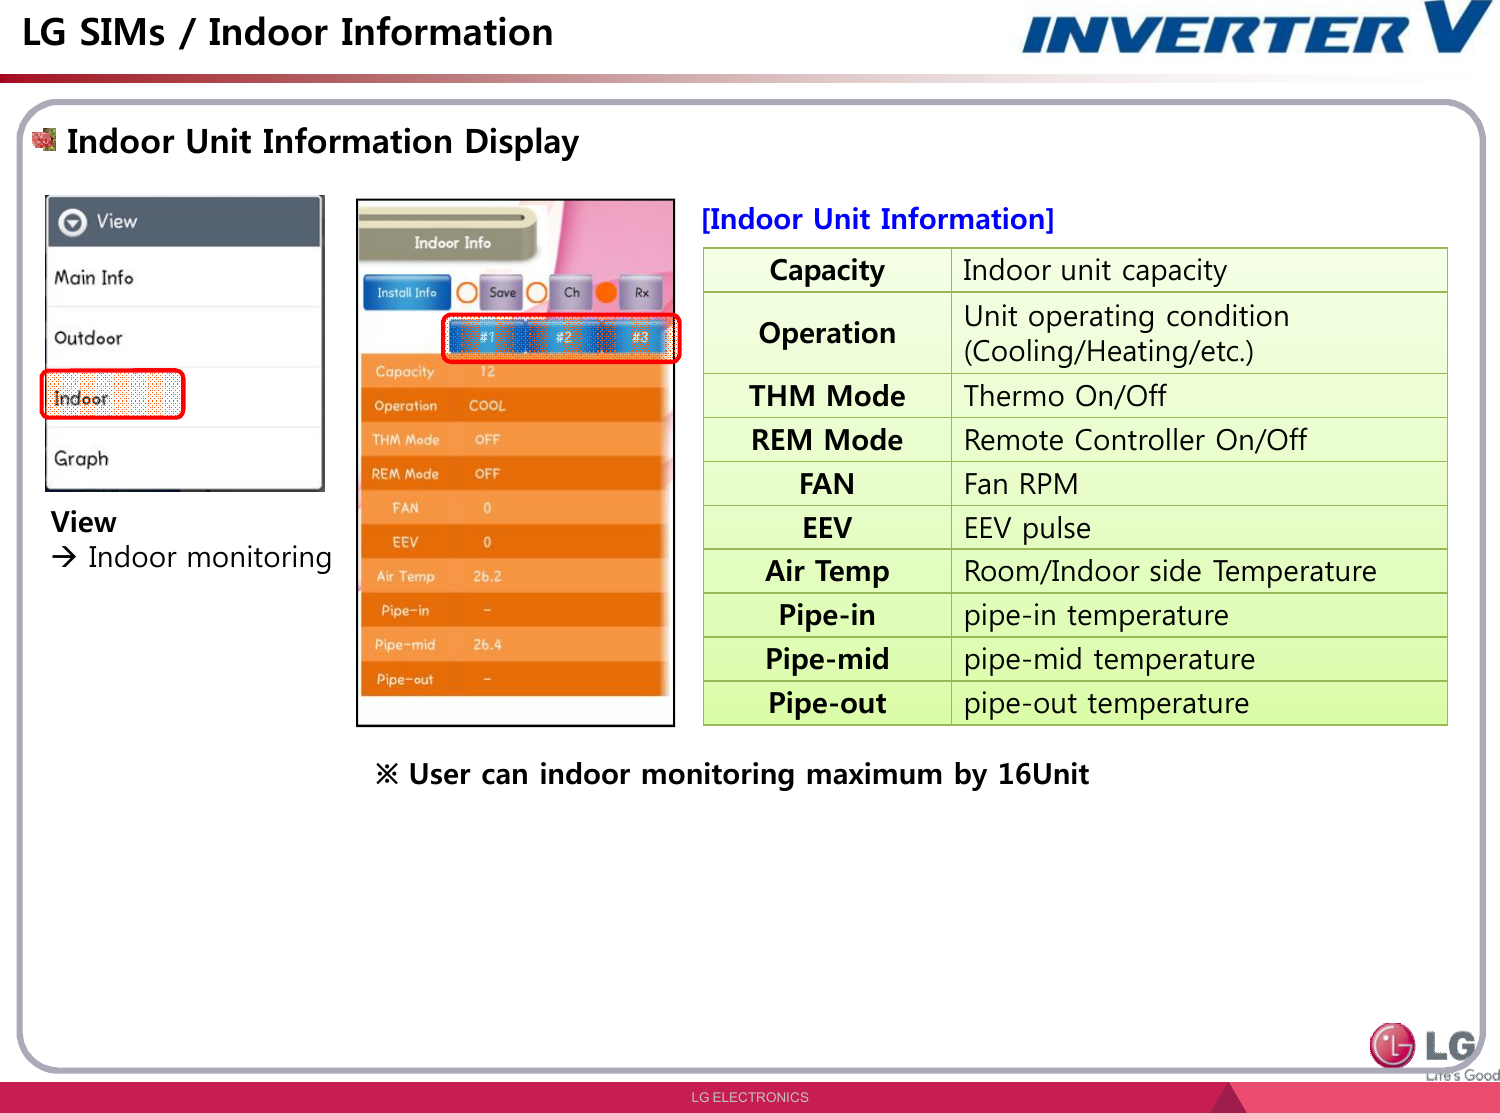 LG ELECTRONICSLG SIMs / Indoor InformationView Indoor monitoringCapacity Indoor unit capacityOperation Unit operating condition (Cooling/Heating/etc.)THM Mode Thermo On/OffREM Mode Remote Controller On/OffFAN Fan RPMEEV EEV pulseAir Temp Room/Indoor side TemperaturePipe-in pipe-in temperaturePipe-mid pipe-mid temperaturePipe-out pipe-out temperature[Indoor Unit Information]Indoor Unit Information Display※ User can indoor monitoring maximum by 16Unit 